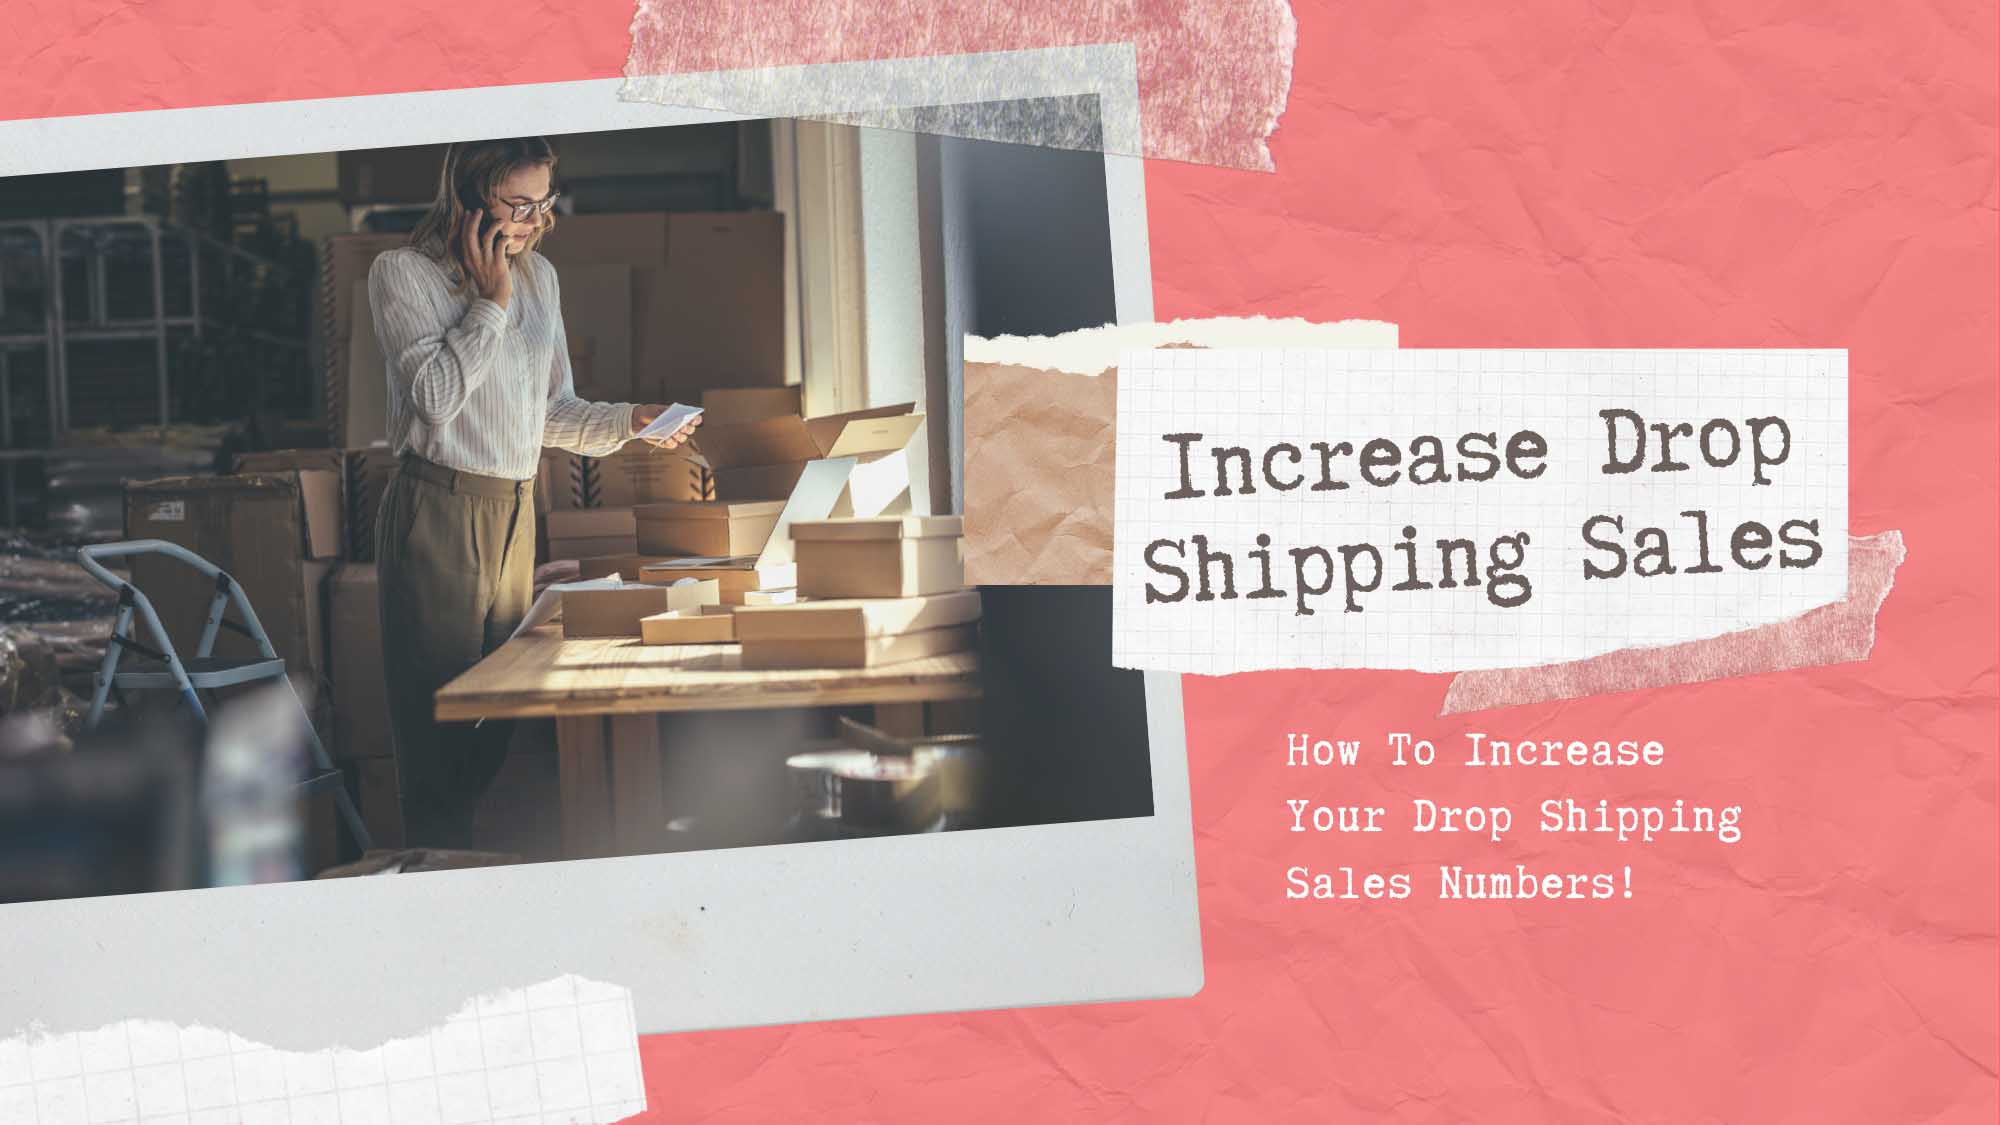 How To Increase Your Drop Shipping Sales Numbers!